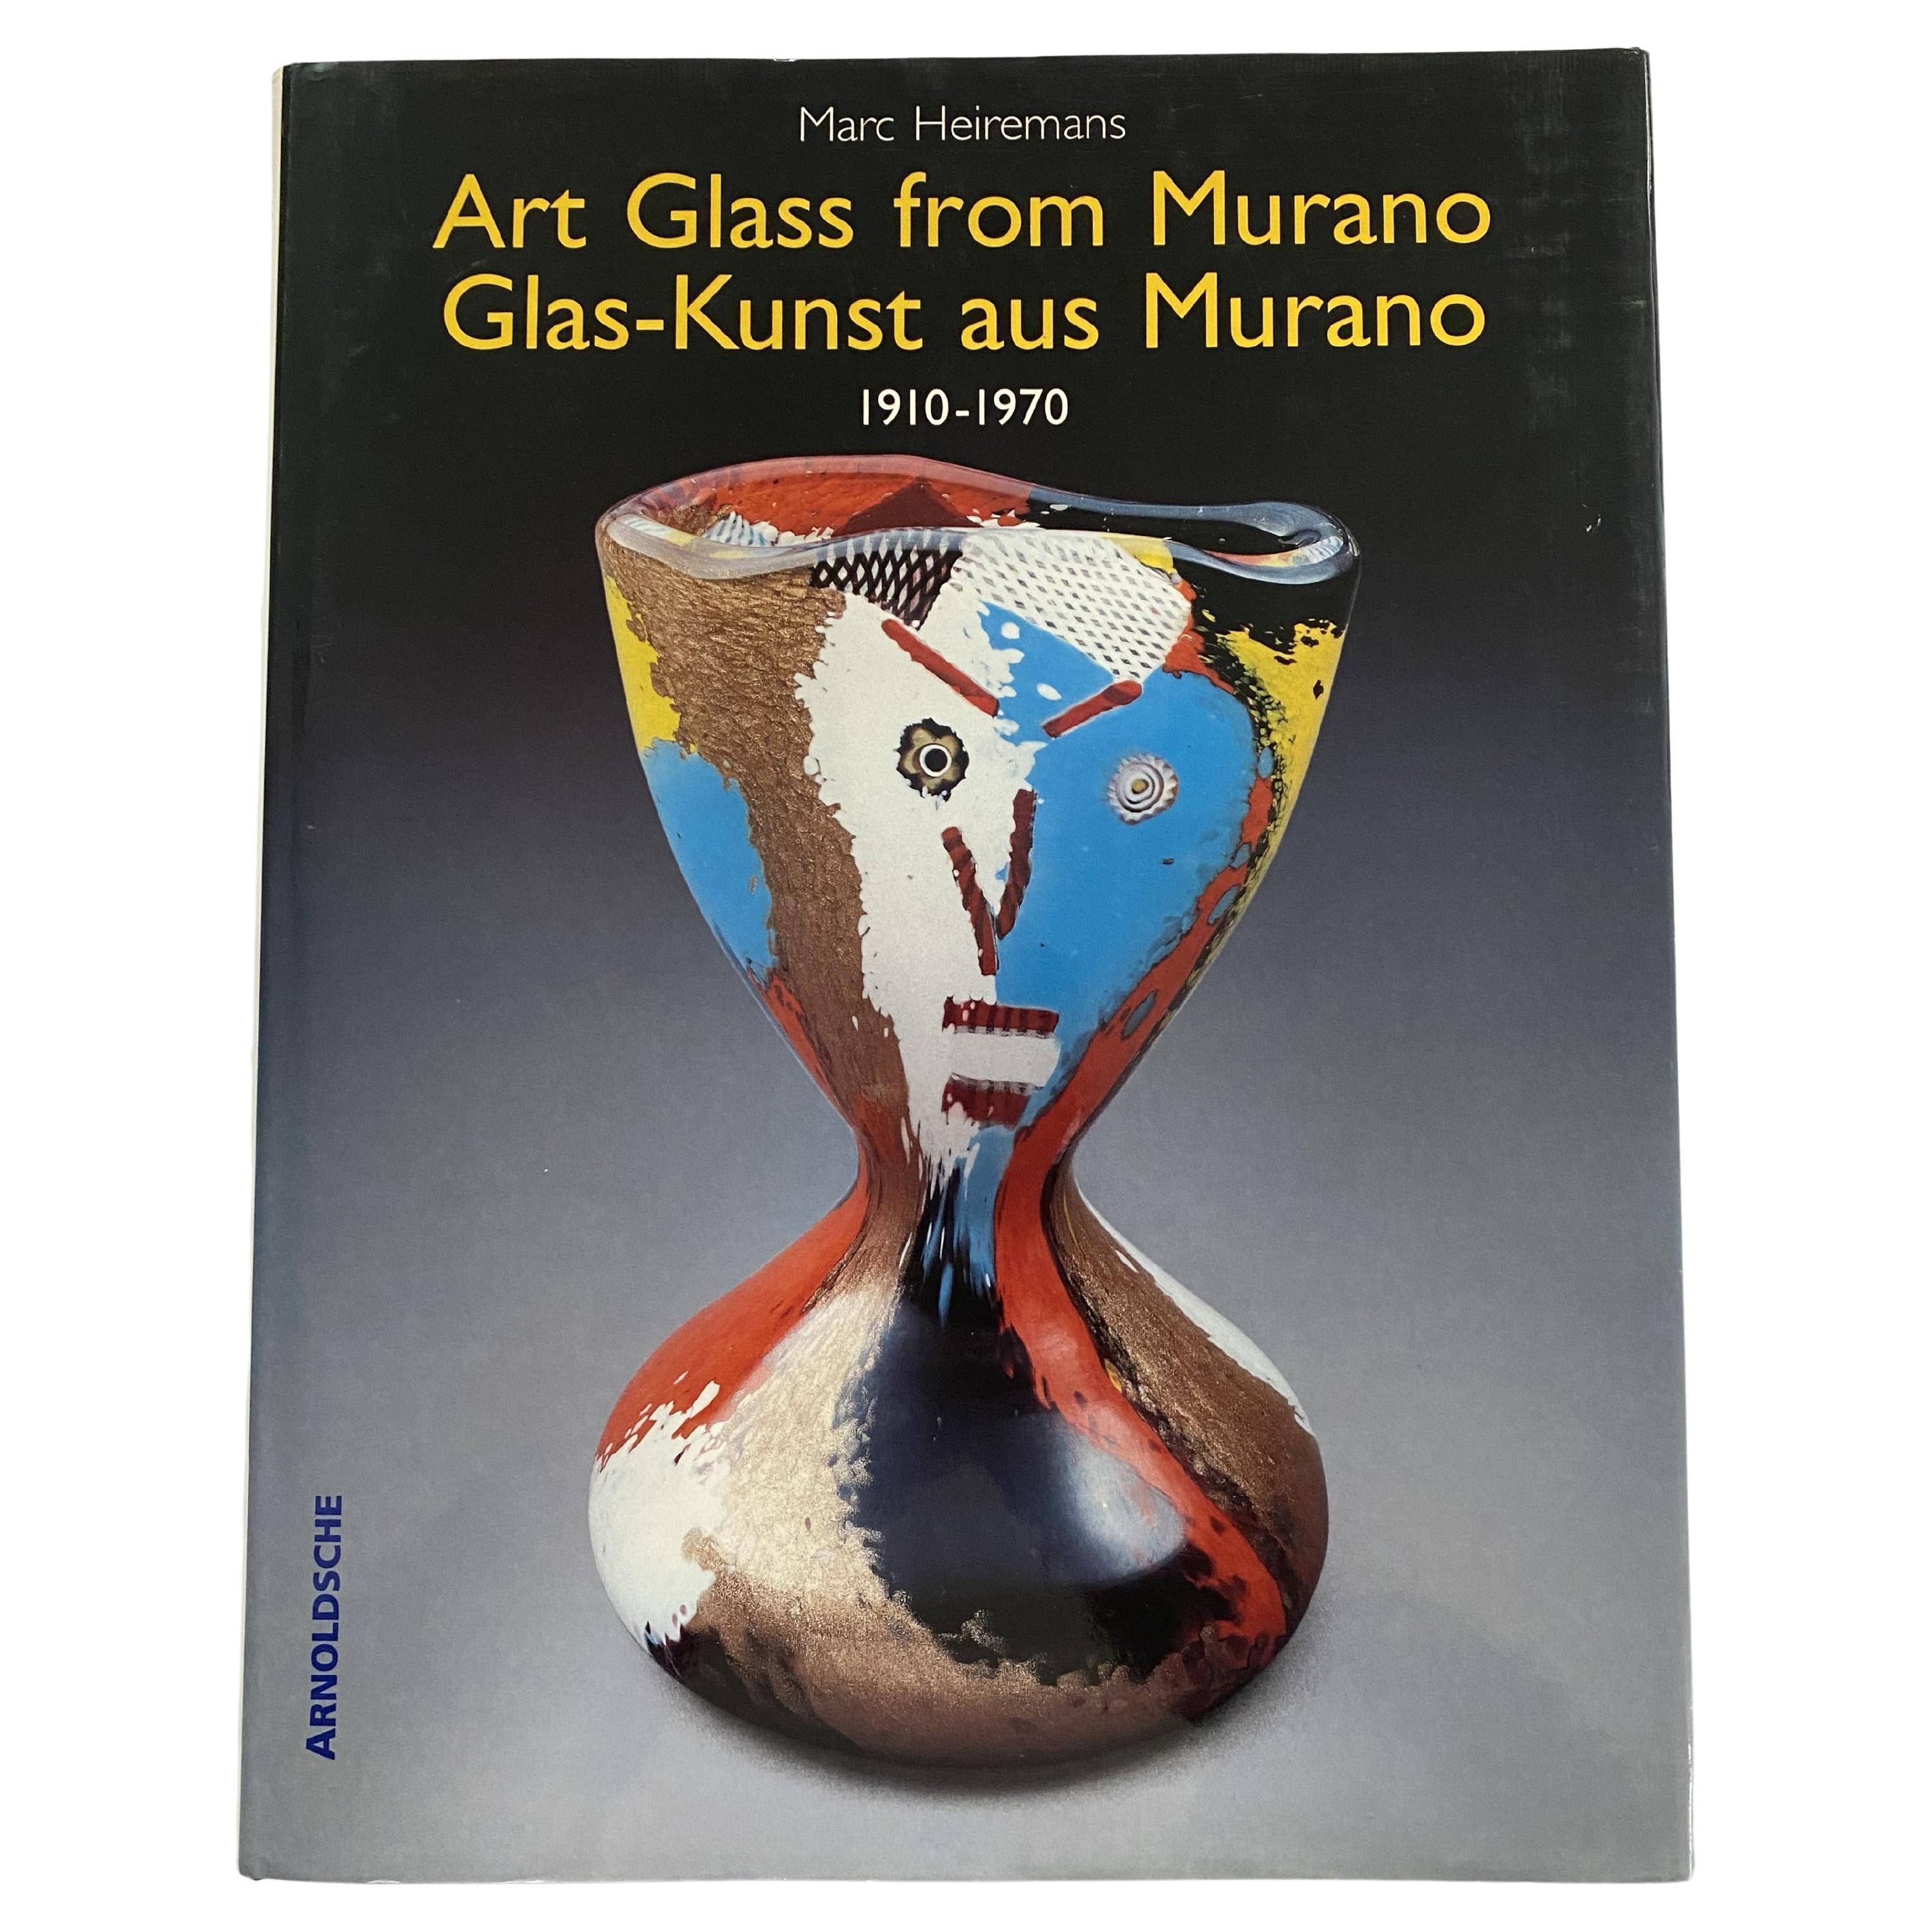 Art Glass from Murano 1910-1970 by Marc Heiremans (Book) For Sale